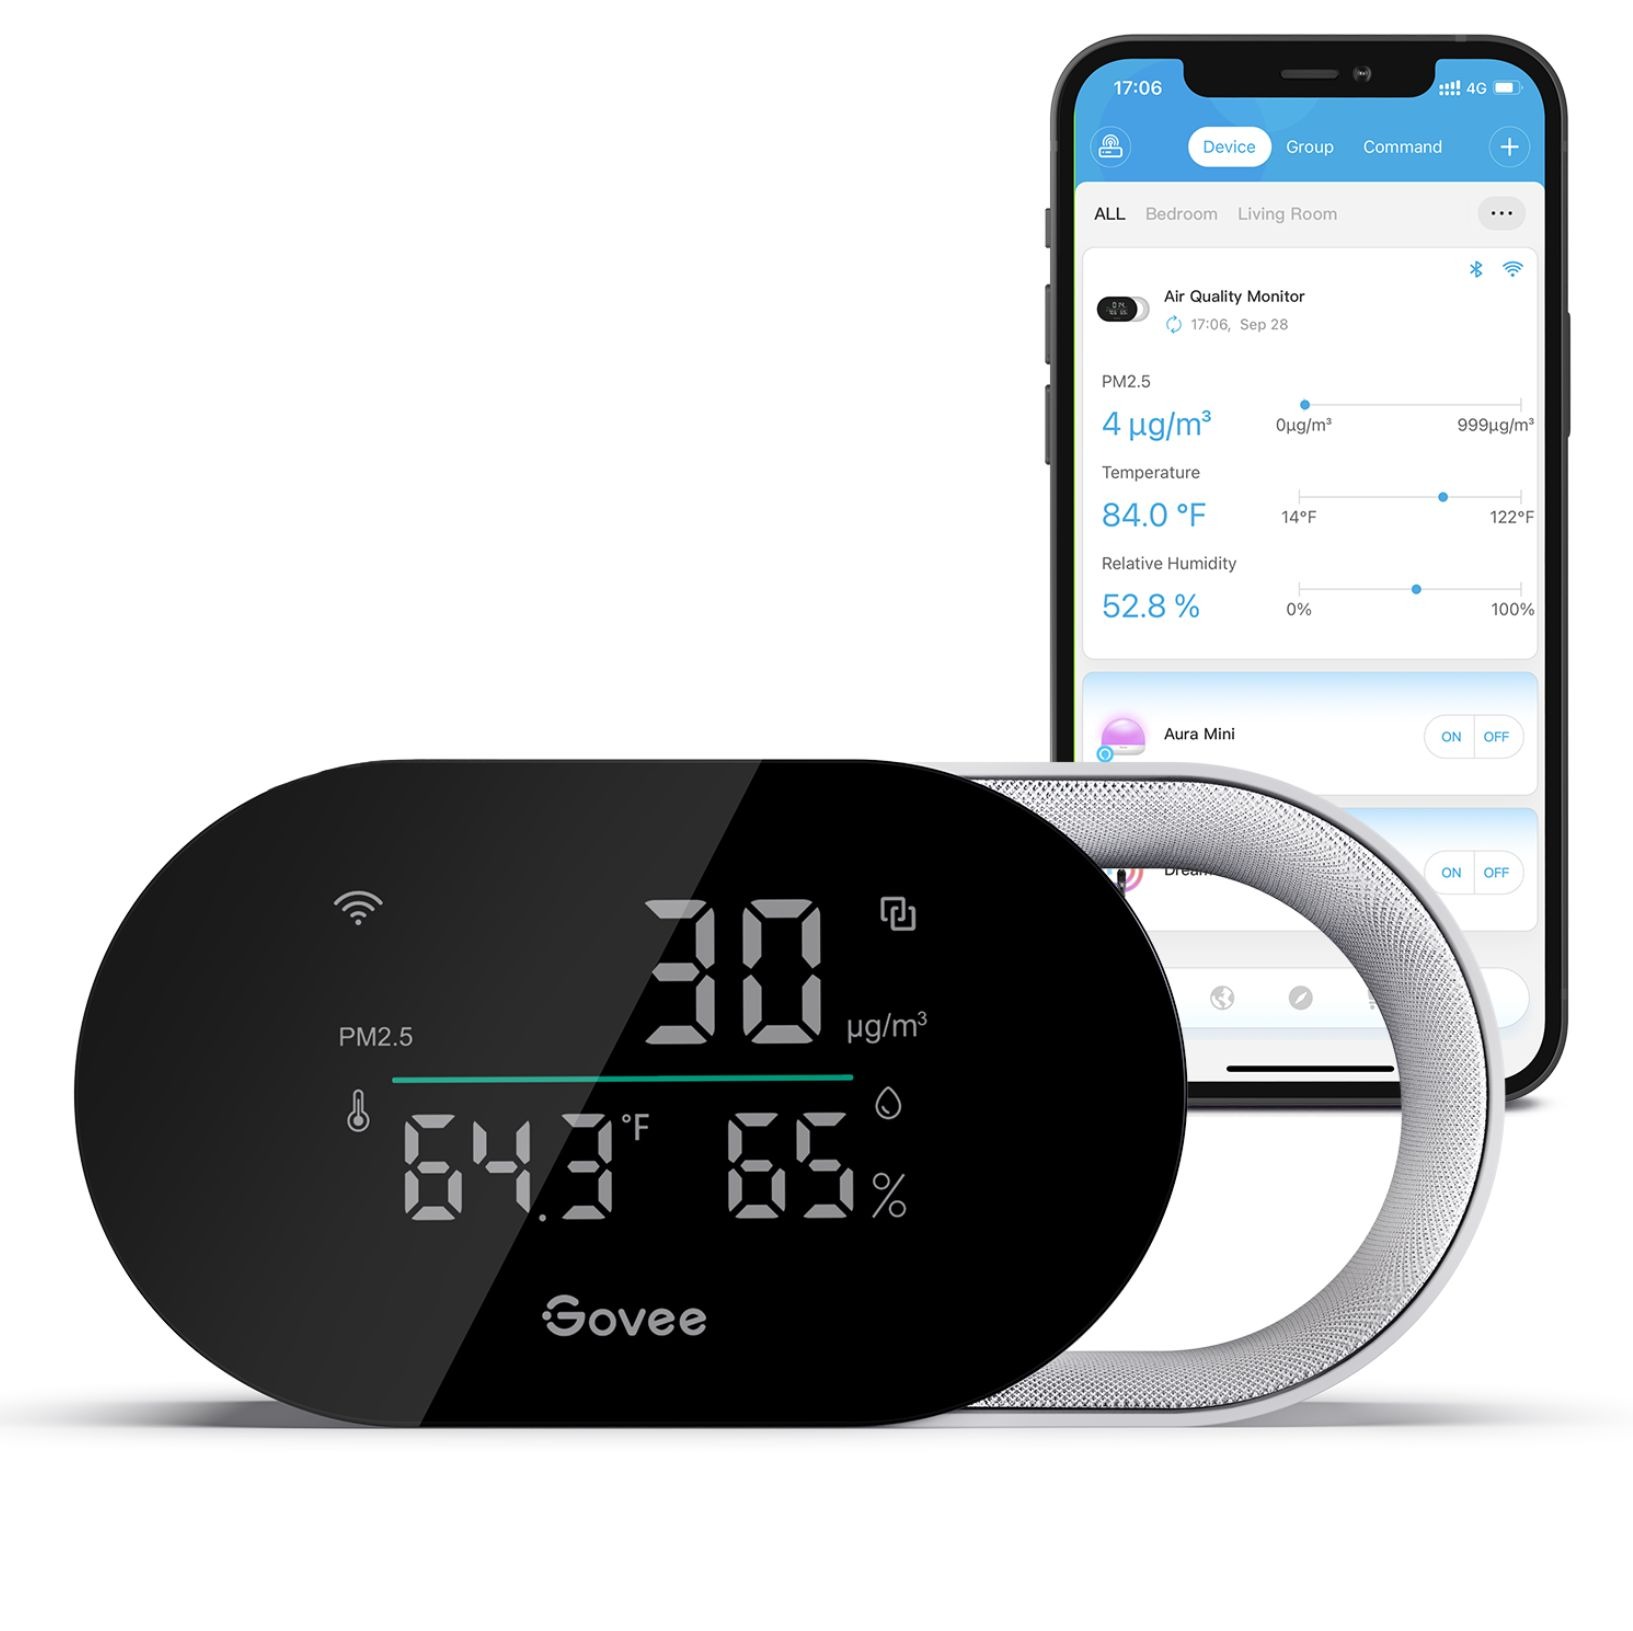 Govee Smart Air Quality Monitor review: Simple but effective